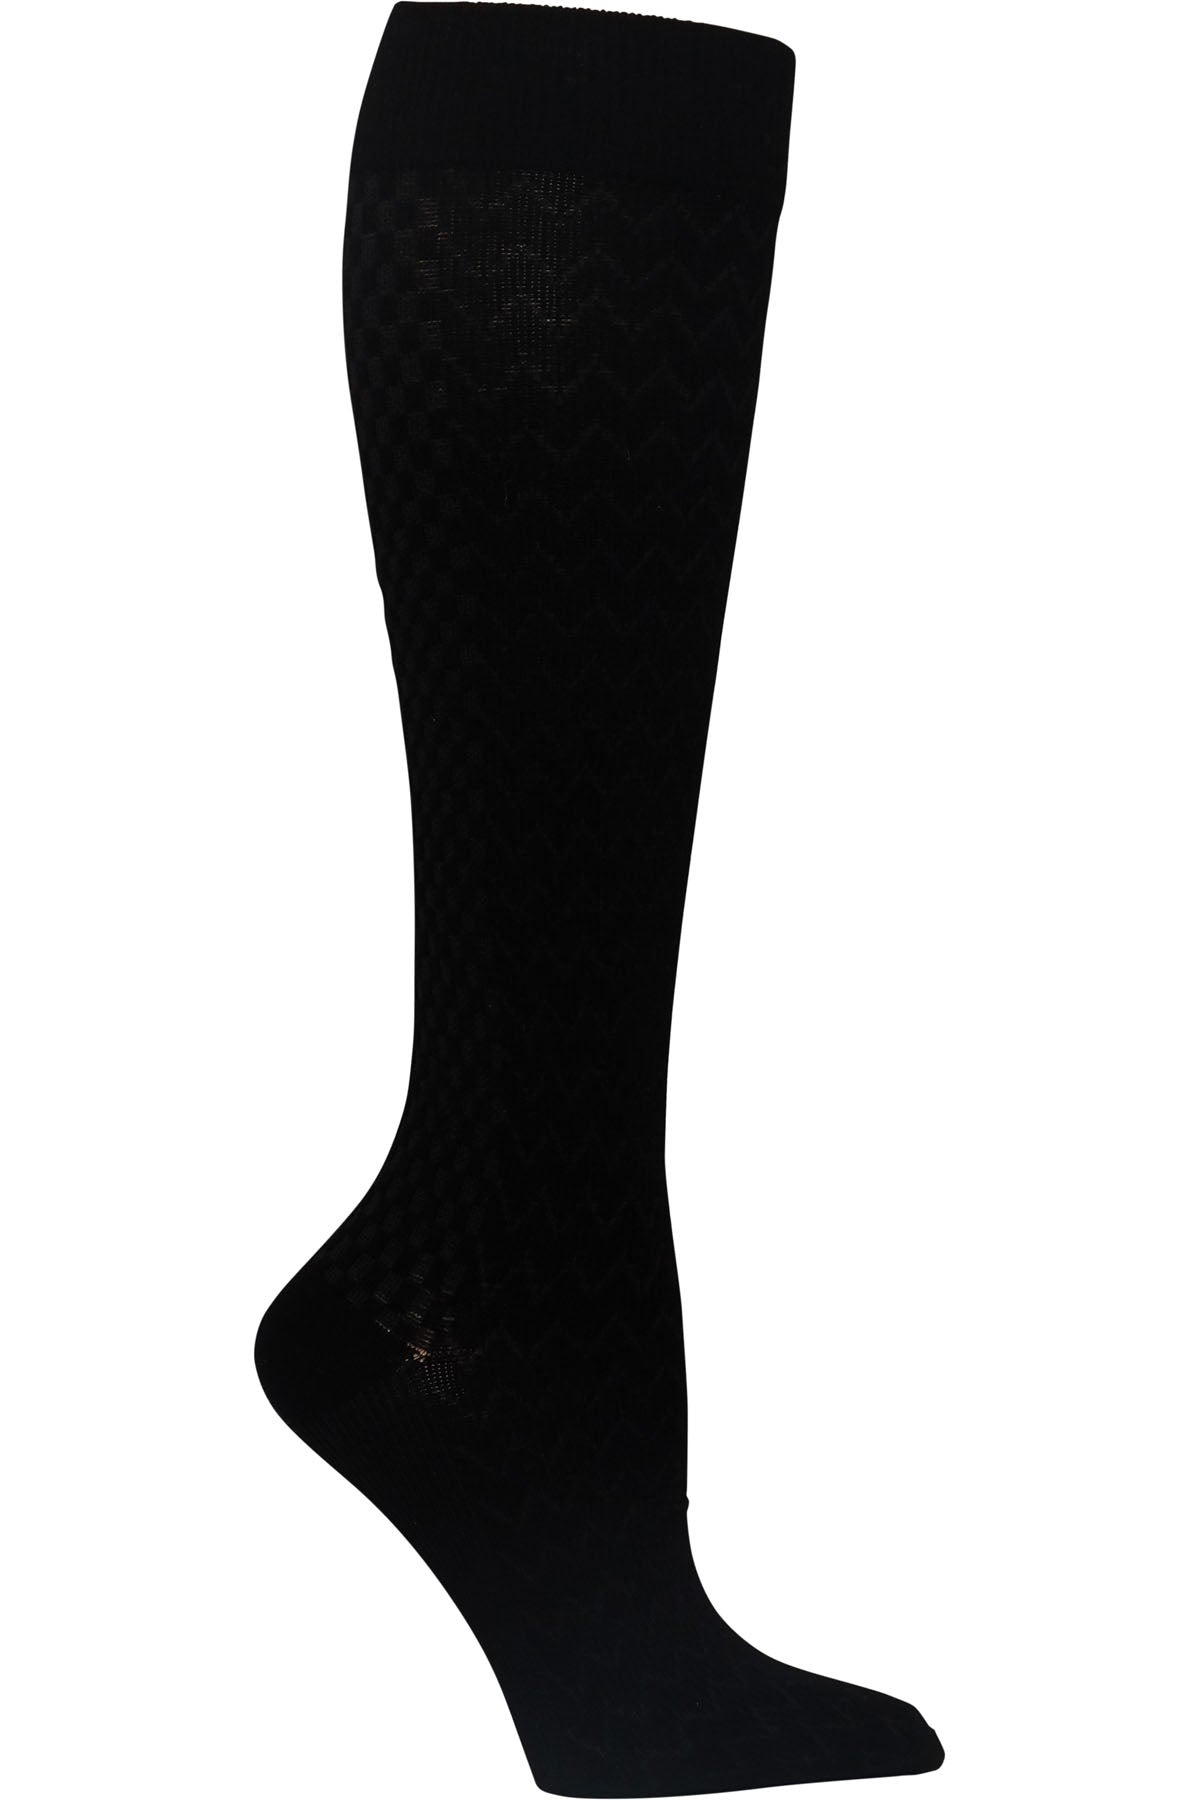 Cherokee Plus Size Mild Compression Extra Wide Calf Socks True Support 10-15 mmHg in Black at Parker's Clothing and Shoes.